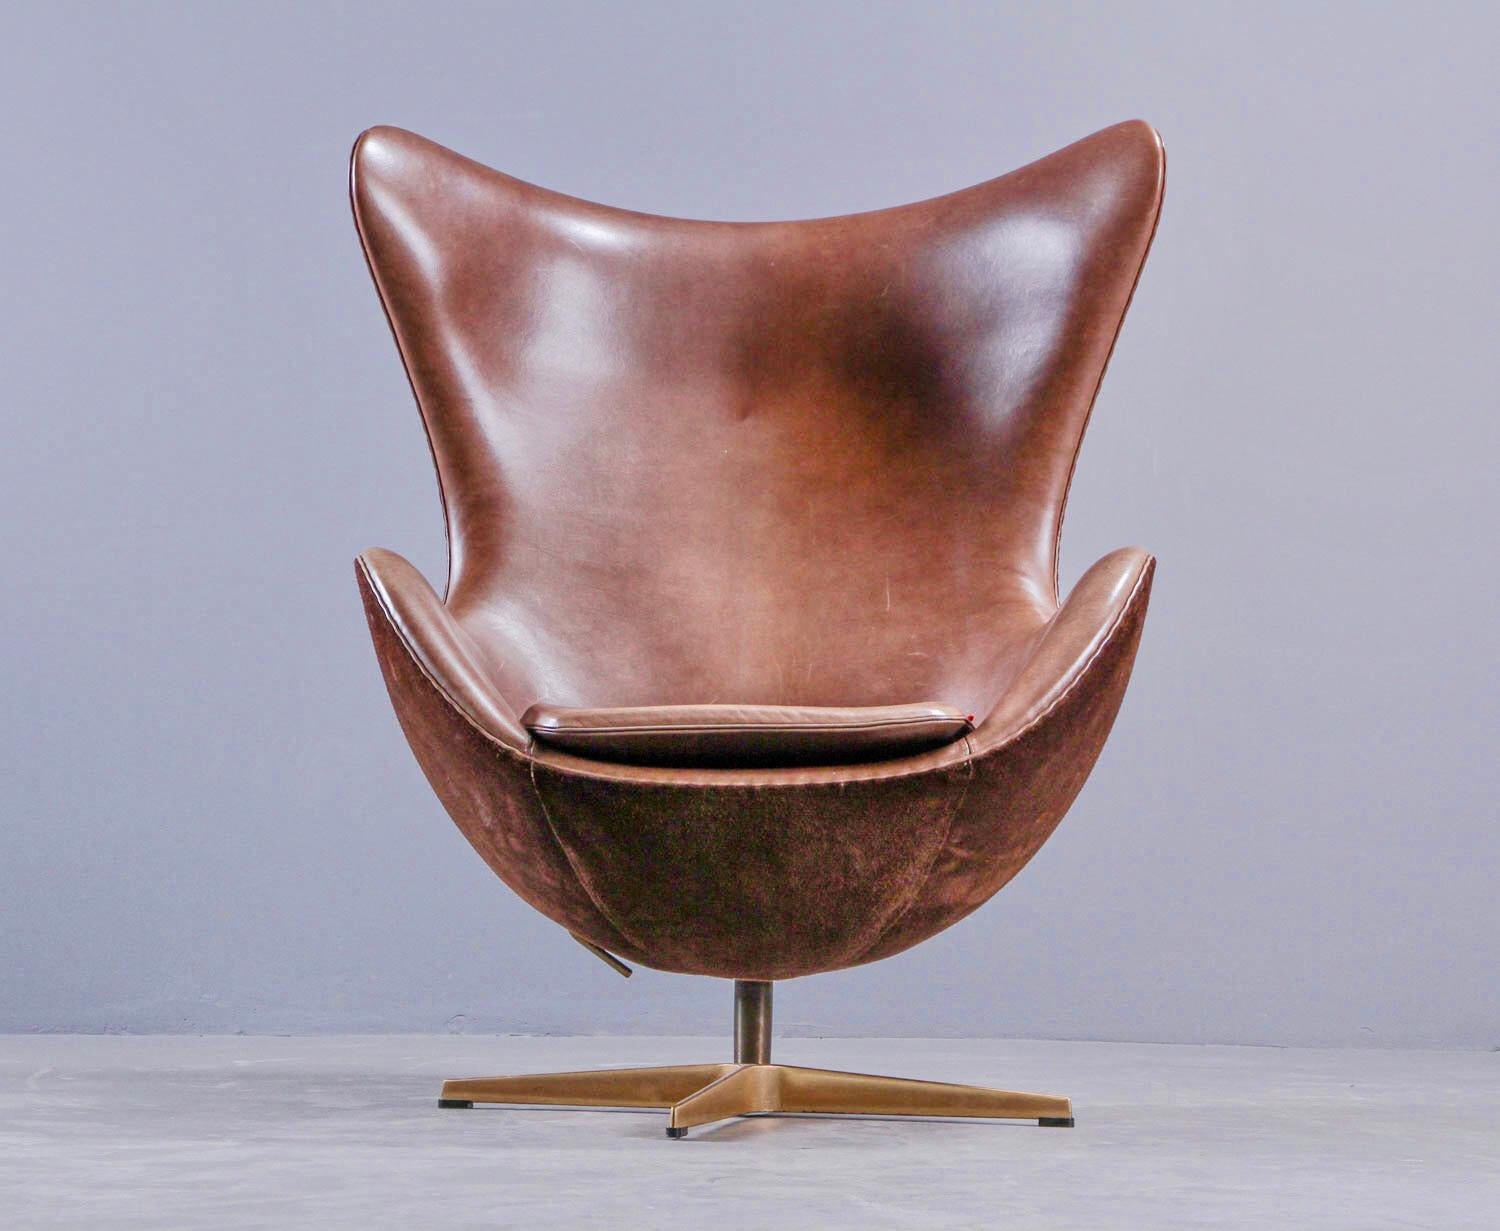 Arne Jacobsen. 'The Golden Egg', Model 3316. Original upholstered in chocolate-brown leather on the front and chocolate-brown suede on the back. Four-star base in solid hand-polished bronze. Designed in 1958. Produced by Fritz Hansen in a limited